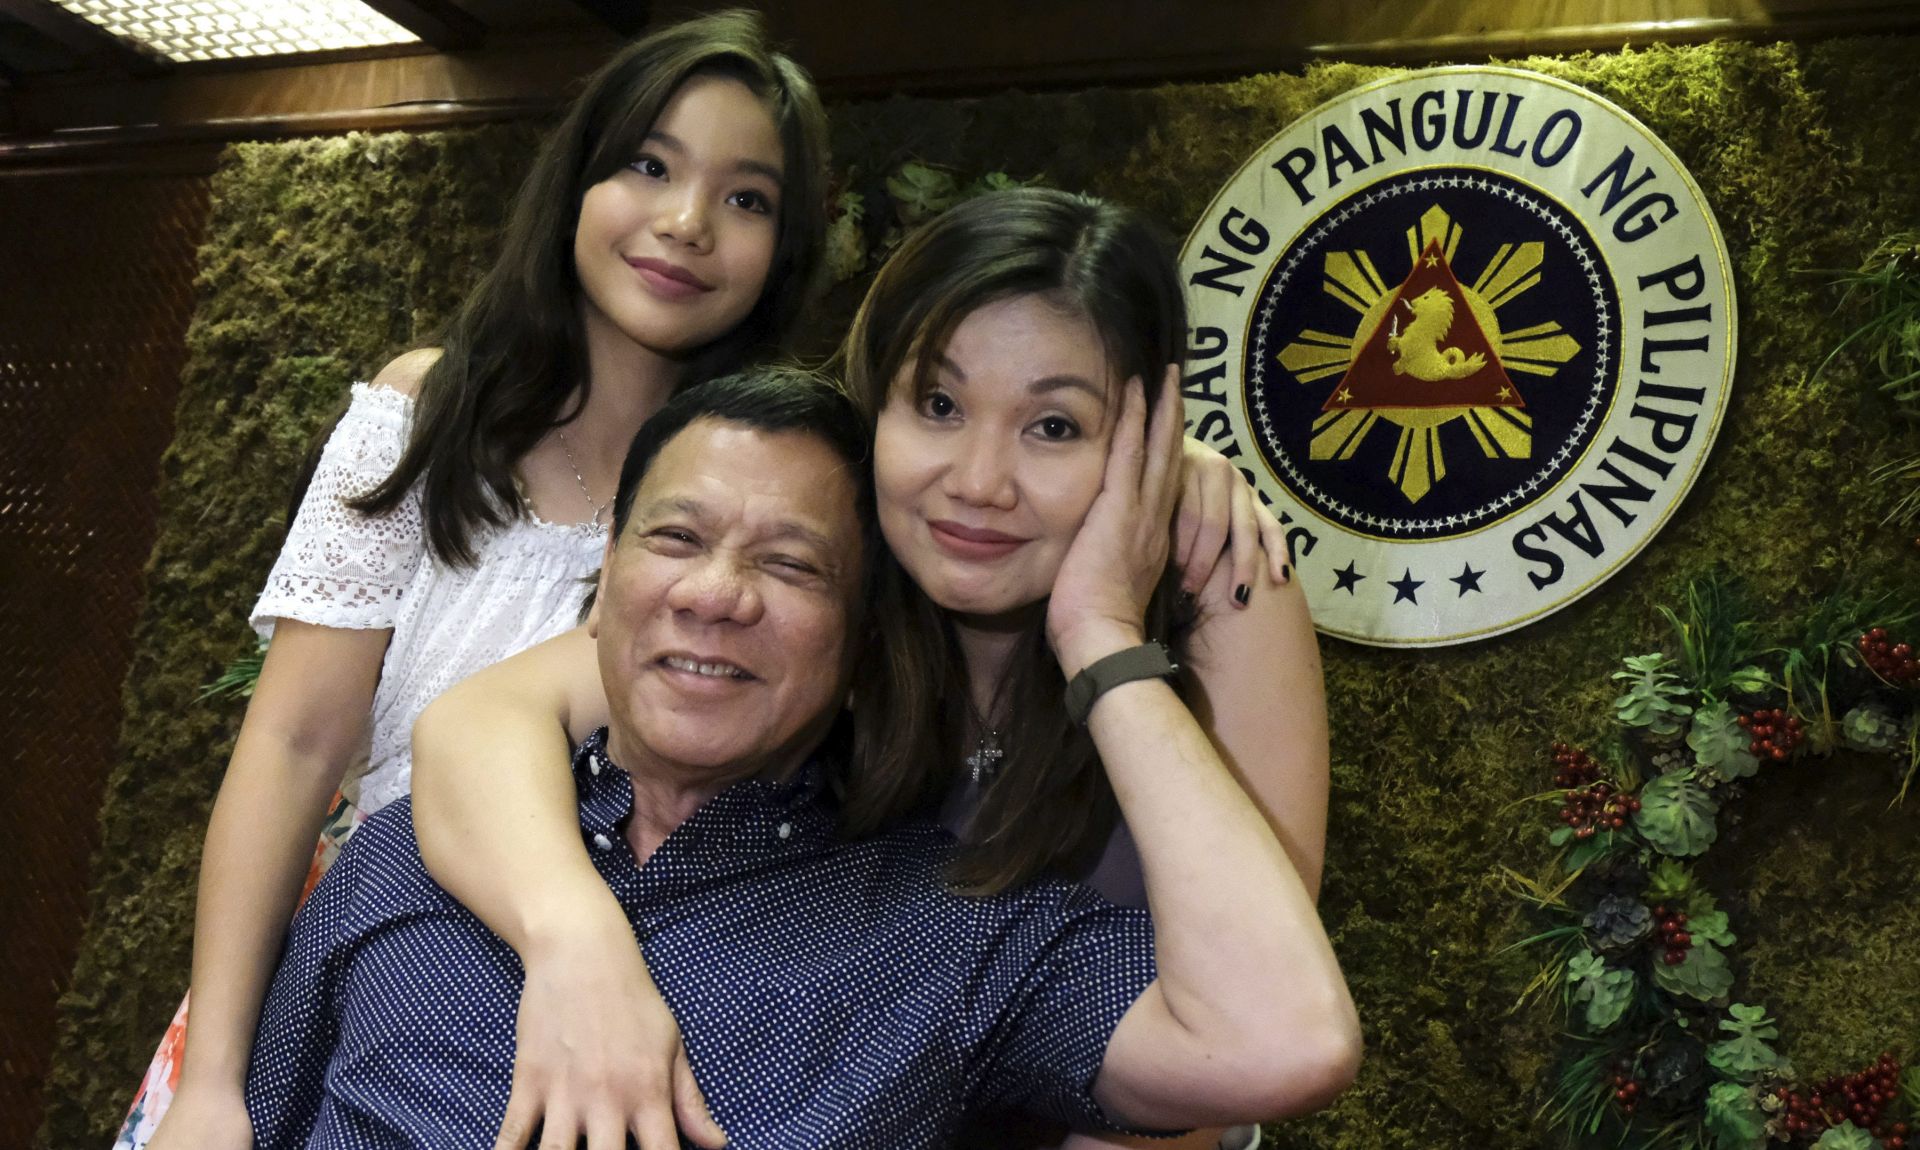 epa05685140 A handout photo made available by the Presidential Photographers Division (PPD) on 22 December 2016 shows Filipino President Rodrigo Duterte (C), his common-law wife Honeylet Avancena (R) and their daughter Veronica (L) posing for a photograph during a Christmas party at Malacanang presidential palace in Manila, Philippines, 20 December 2016. The president of the Philippines declared a unilateral truce with Communist rebels of the New People's Army (NPA) for Christmas. According to media reports, military operations will be halted from 23 to 27 December and from 31 December to 02 January 2017.  EPA/PPD/KING RODRIGUEZ / HANDOUT  HANDOUT EDITORIAL USE ONLY/NO SALES